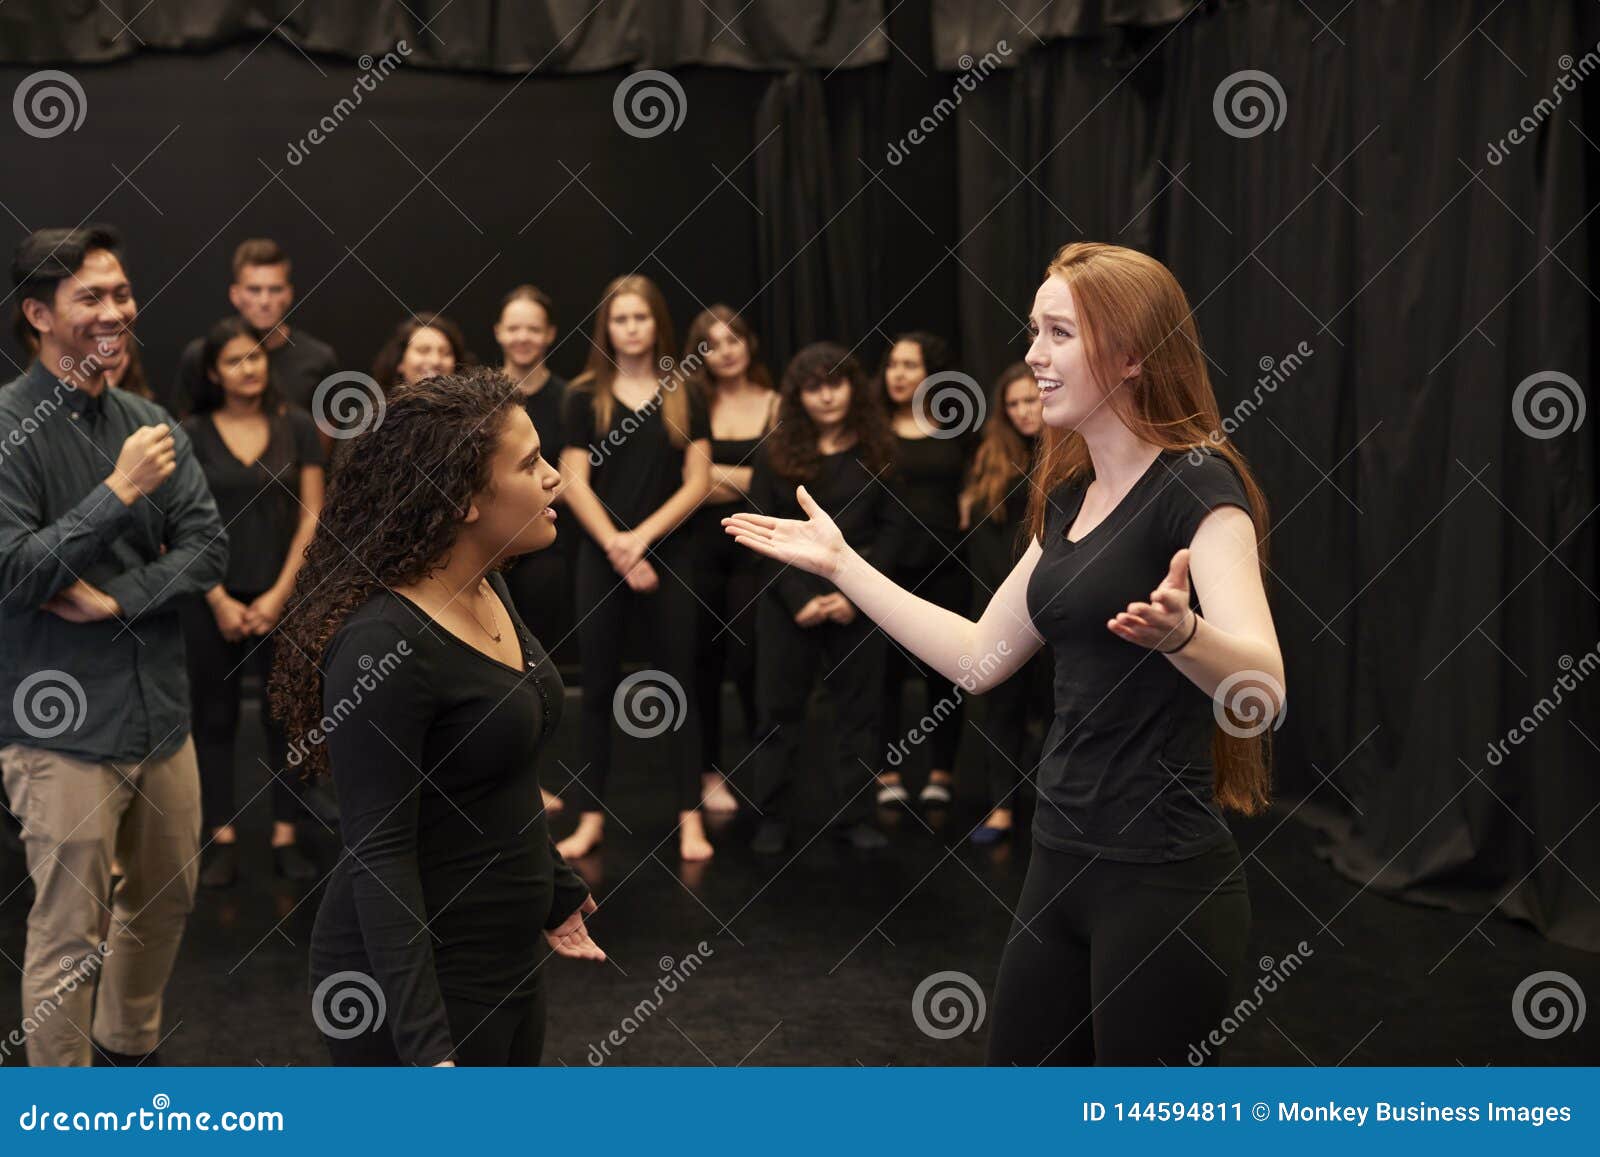 teacher with male and female drama students at performing arts school in studio improvisation class